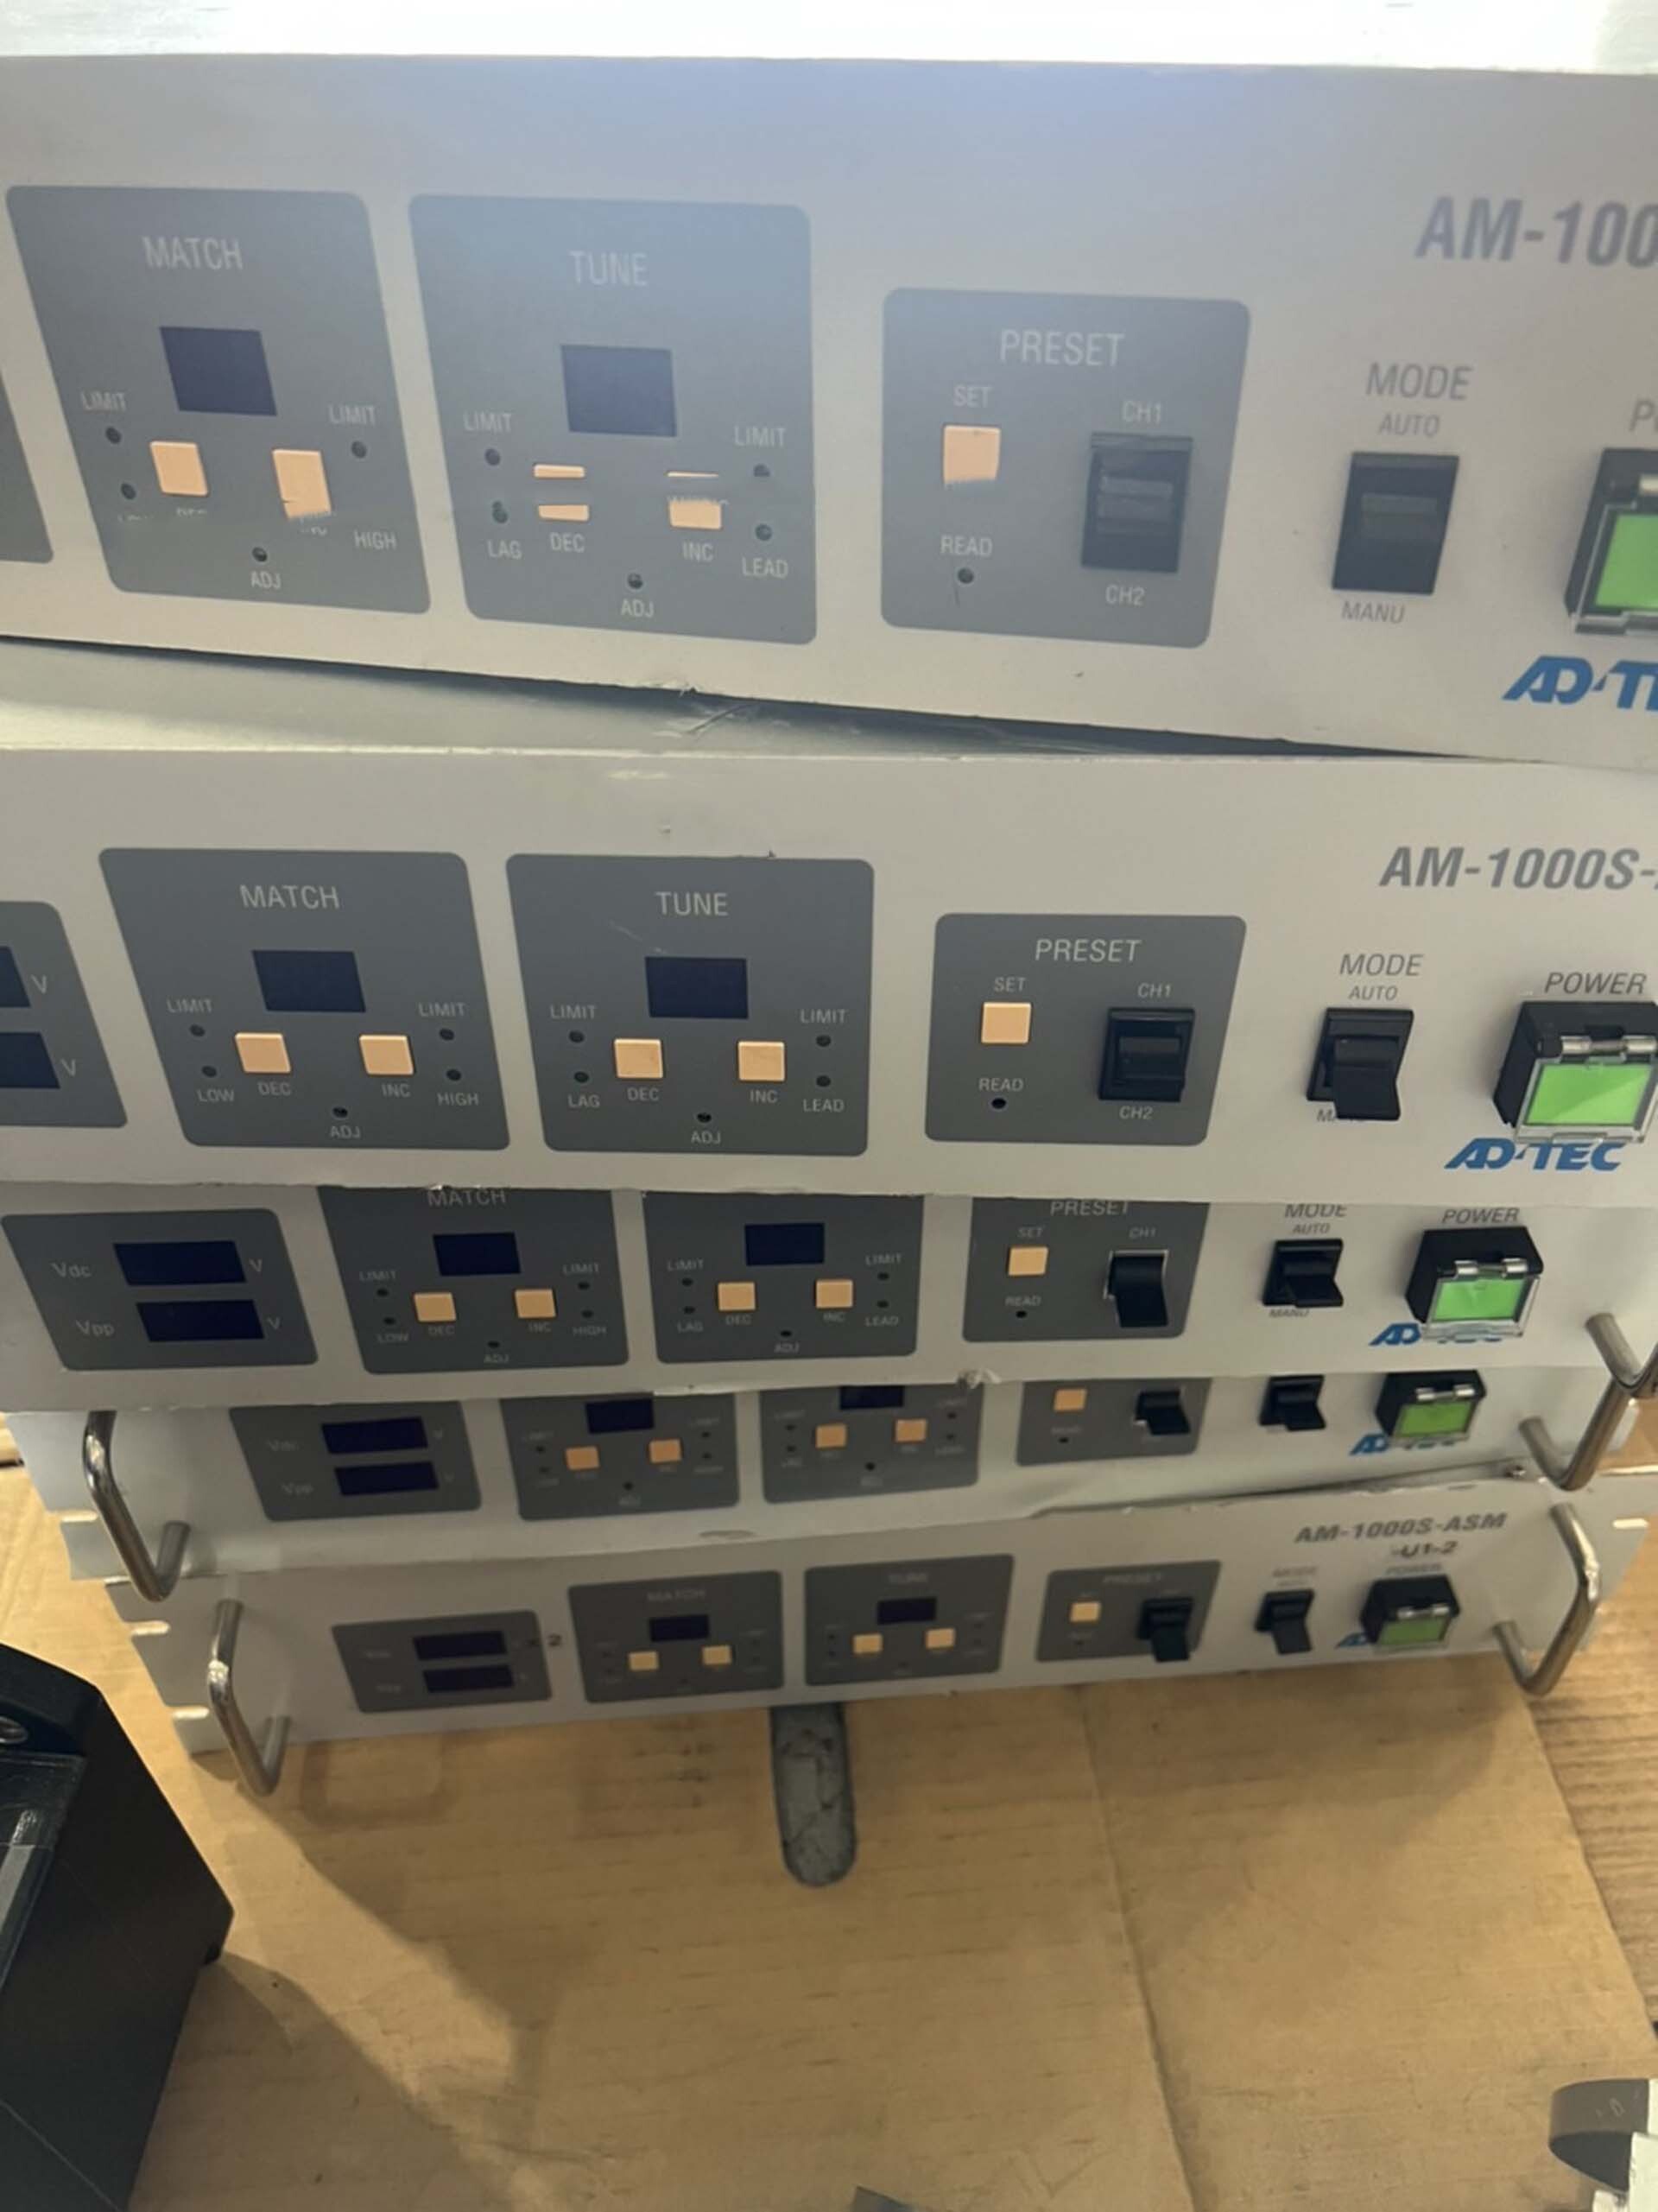 Photo Used ADTEC AM-1000S-ASM For Sale